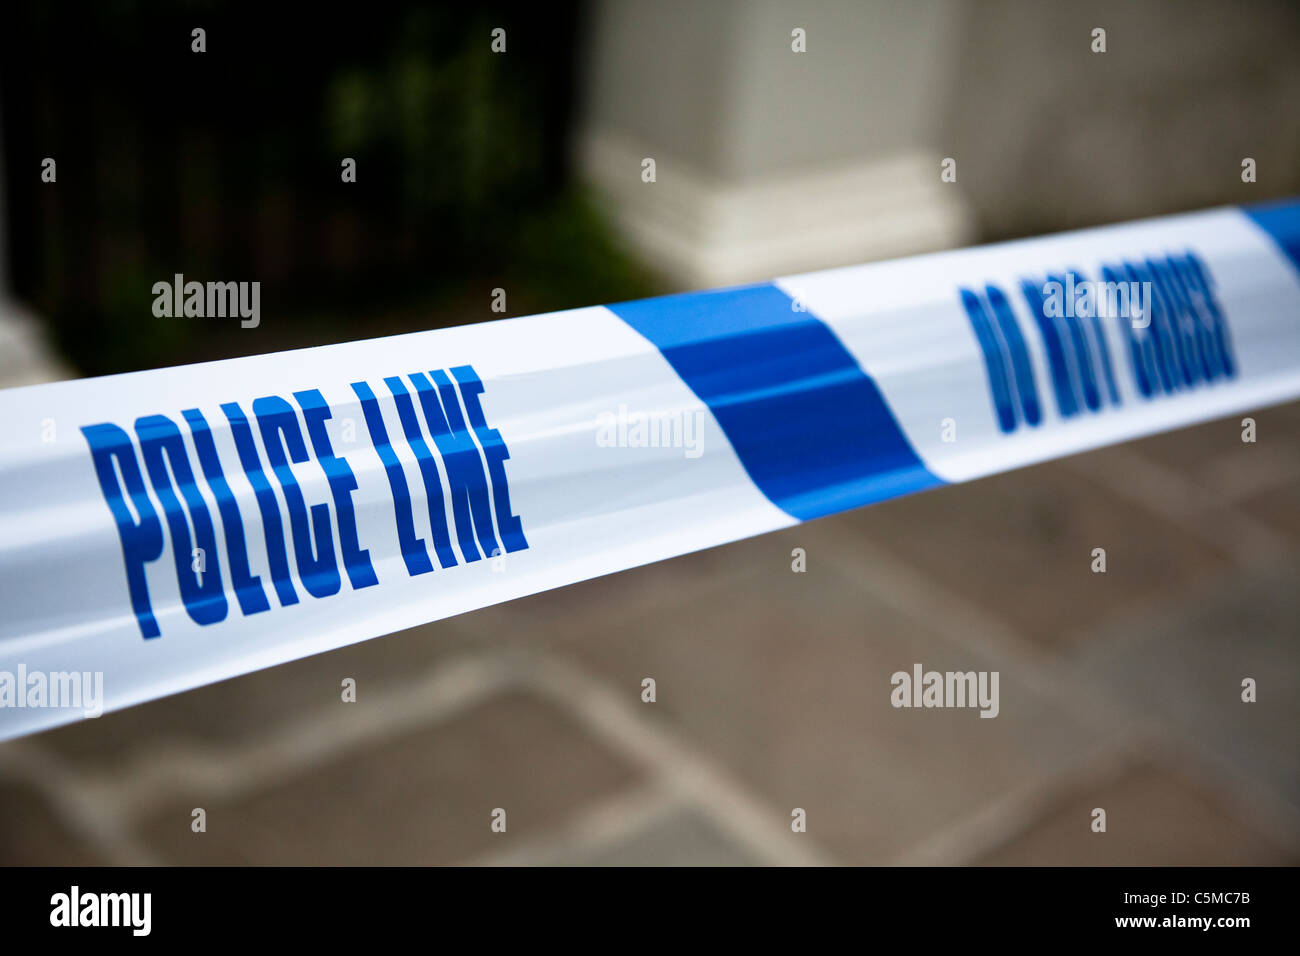 Police tape marking a cordoned off area. Stock Photo